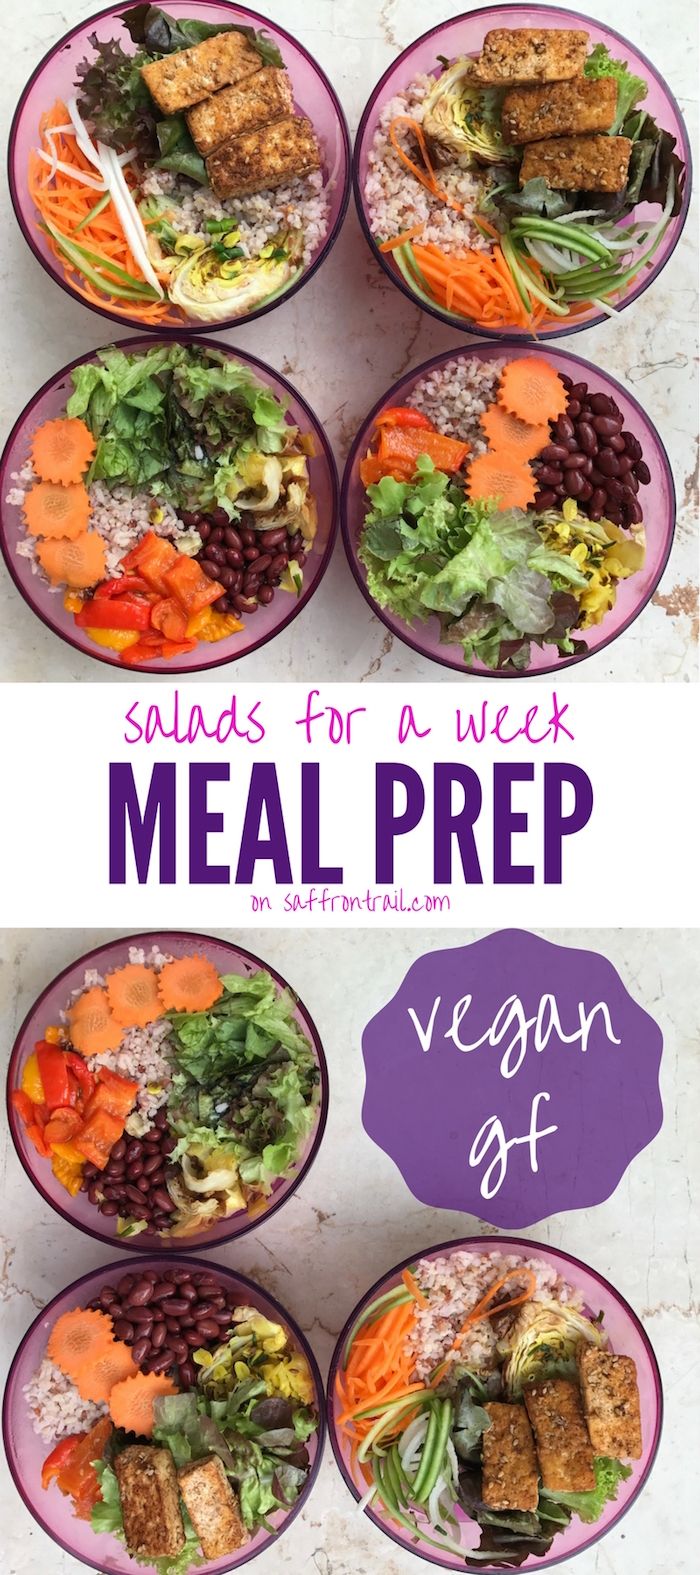 Meal Prep Ideas Vegan Salads for 1 week - Around an hour of work and you have a week's worth of healthy salads ready - vegan and gluten free too! Get all the necessary resources in this post.